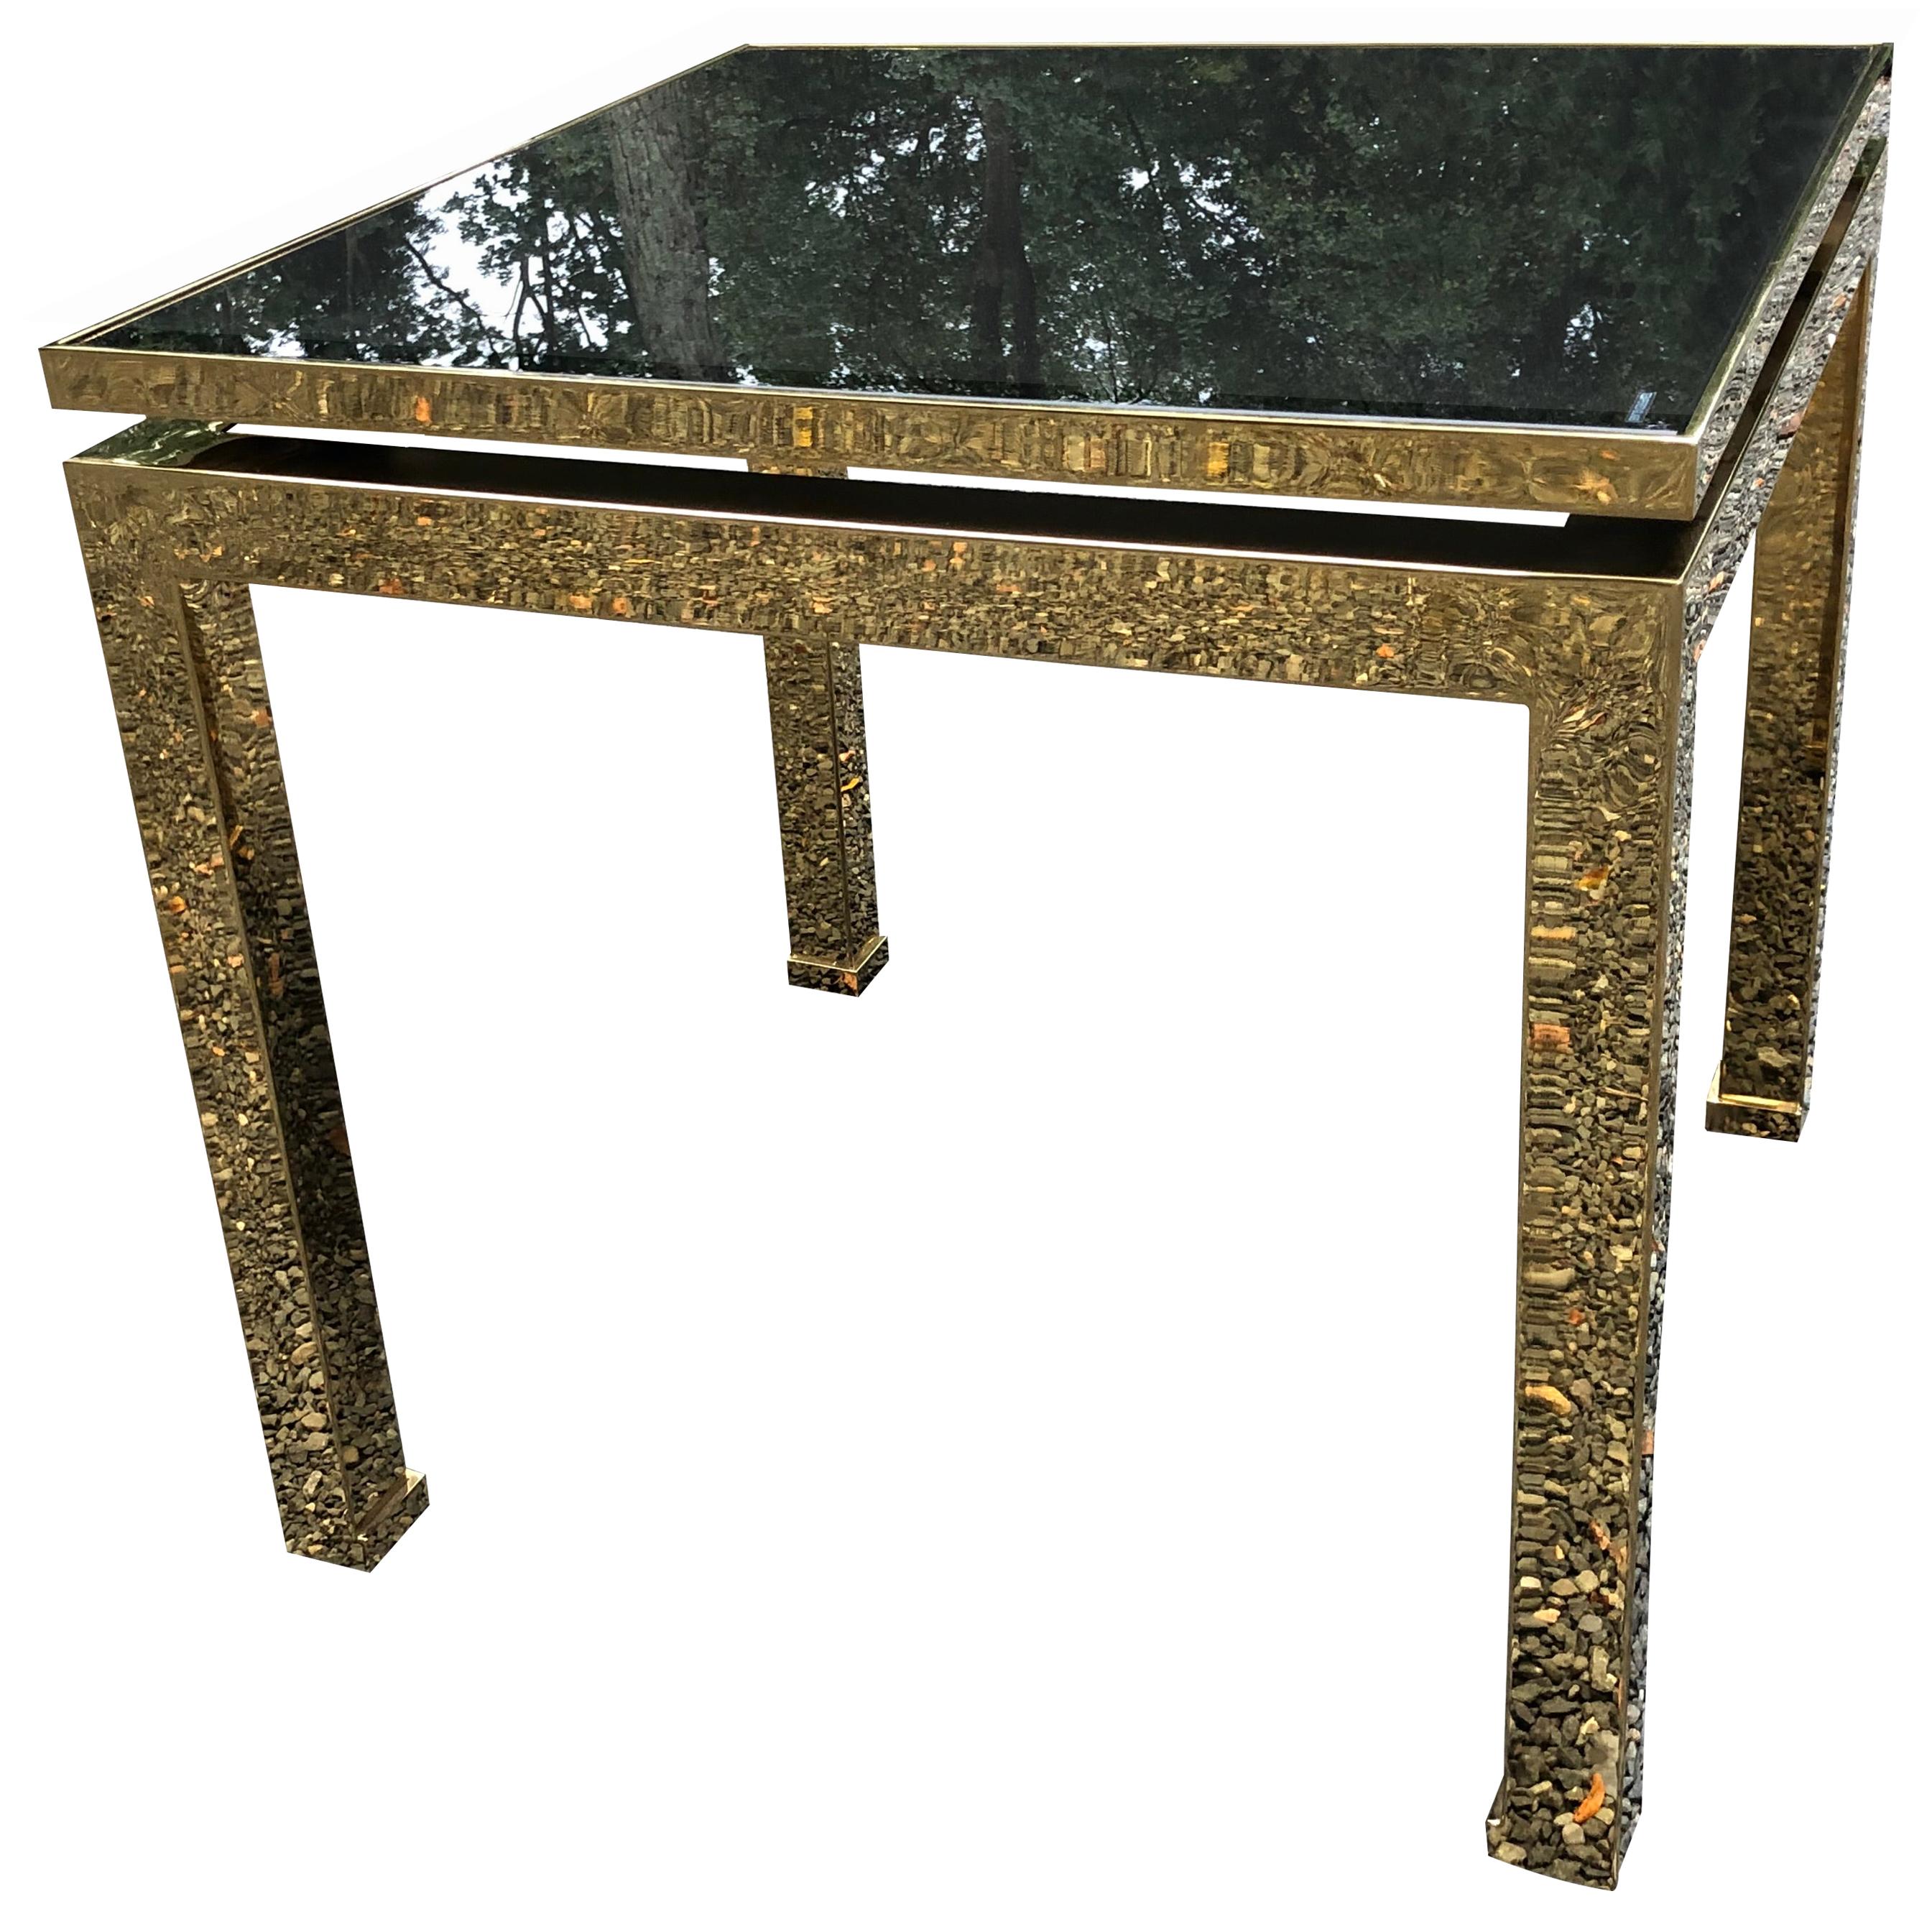 Sophisticated midcentury Guy Lefevre for Maison Jansen side table in brass and smoked dark glass. Elegant turned in feet; very easy, thick brass construction, France, 1970s, very good condition; there are some minor scratches in glass but only